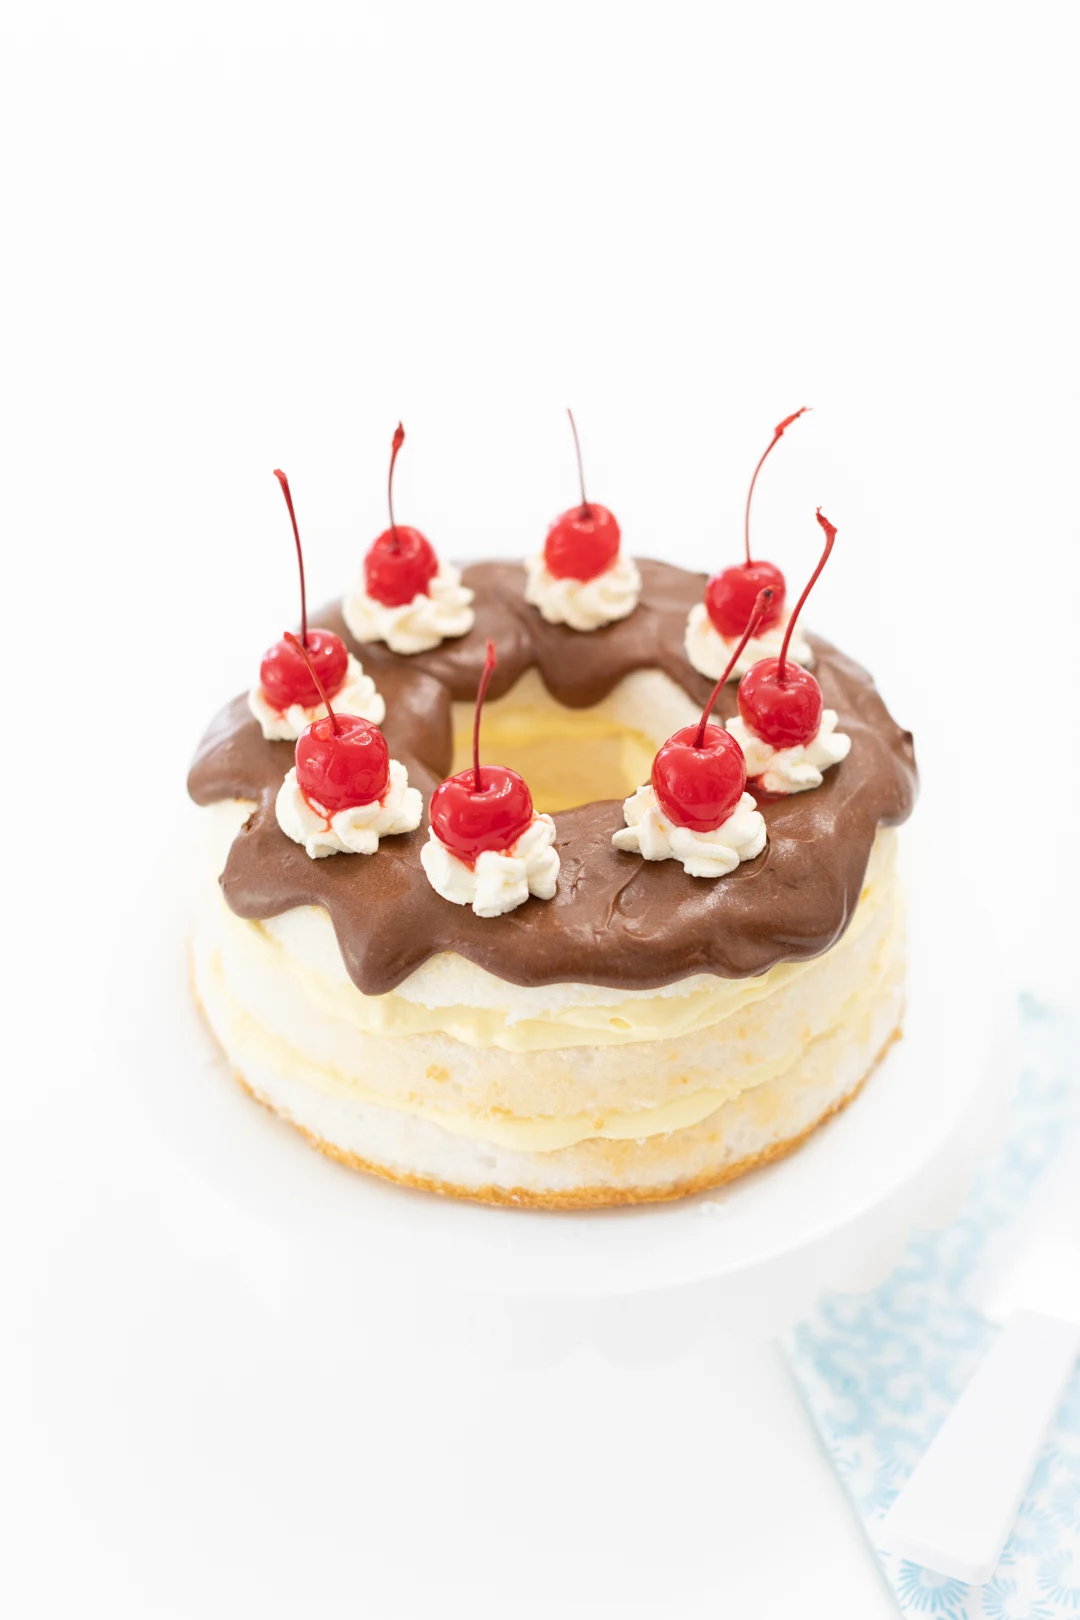 pretty chocolate covered cake with layers of pudding and topped with pretty cherries